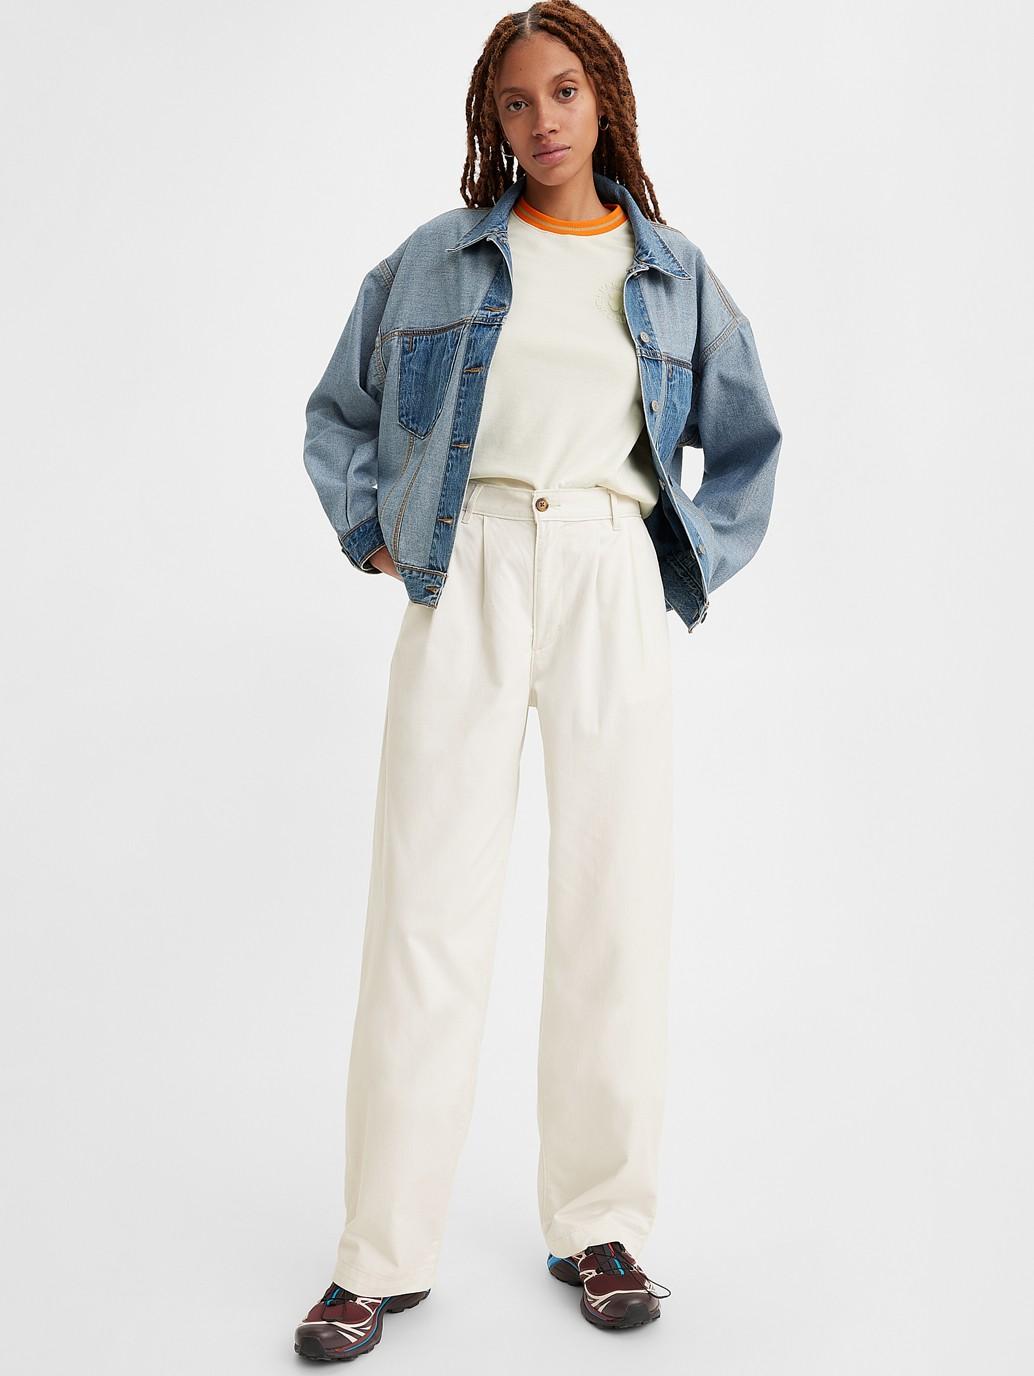 Buy Levi's® Women's High-Rise Pleated Trousers| Levi’s® Official Online ...